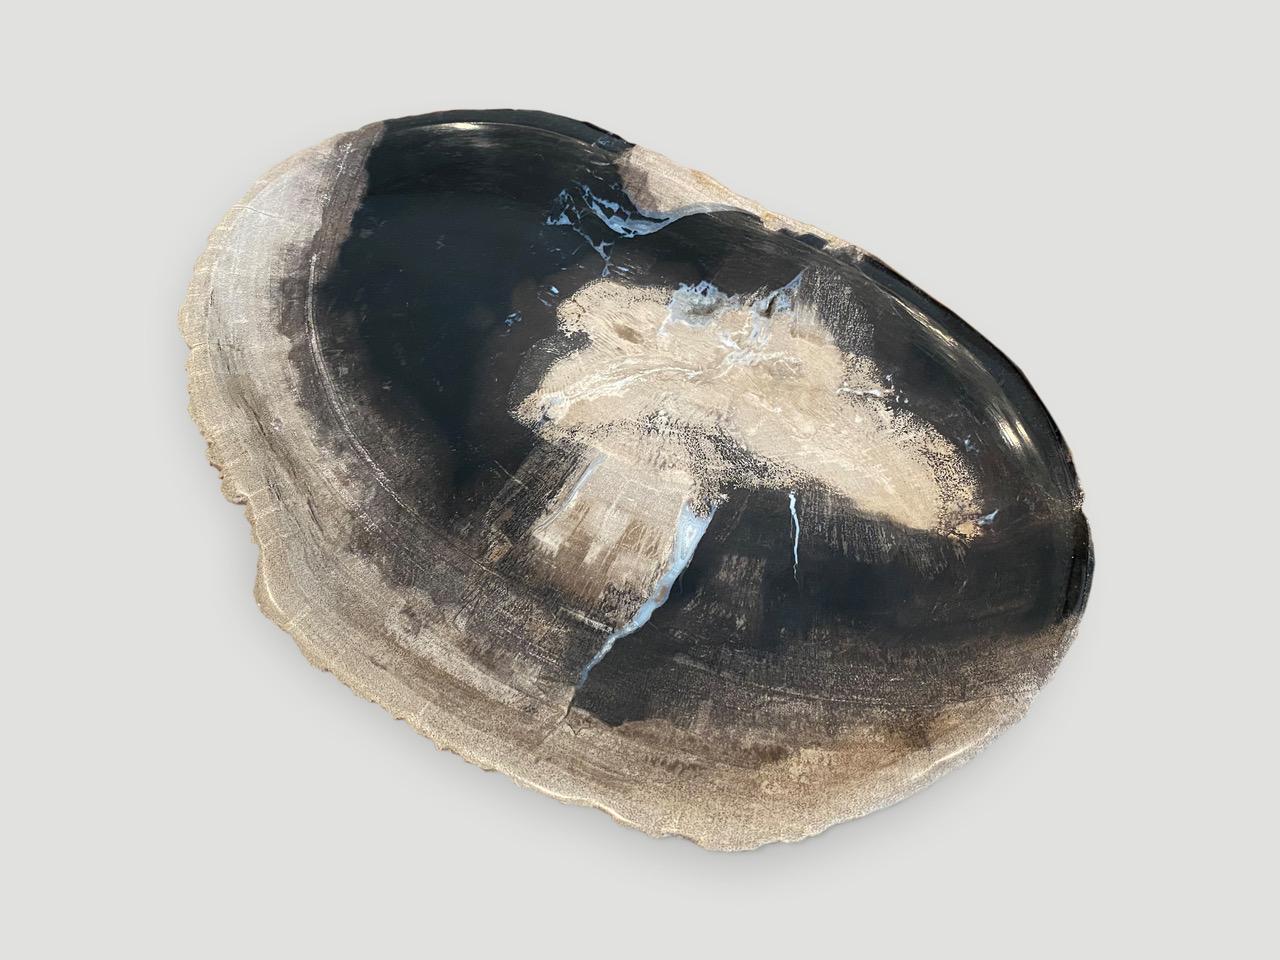 Beautiful high quality petrified wood dish with a live edge. Great as a soap dish, or for holding jewelry, keys, etc etc

As with a diamond, we polish the highest quality fossilized petrified wood, using our latest ground breaking technology to